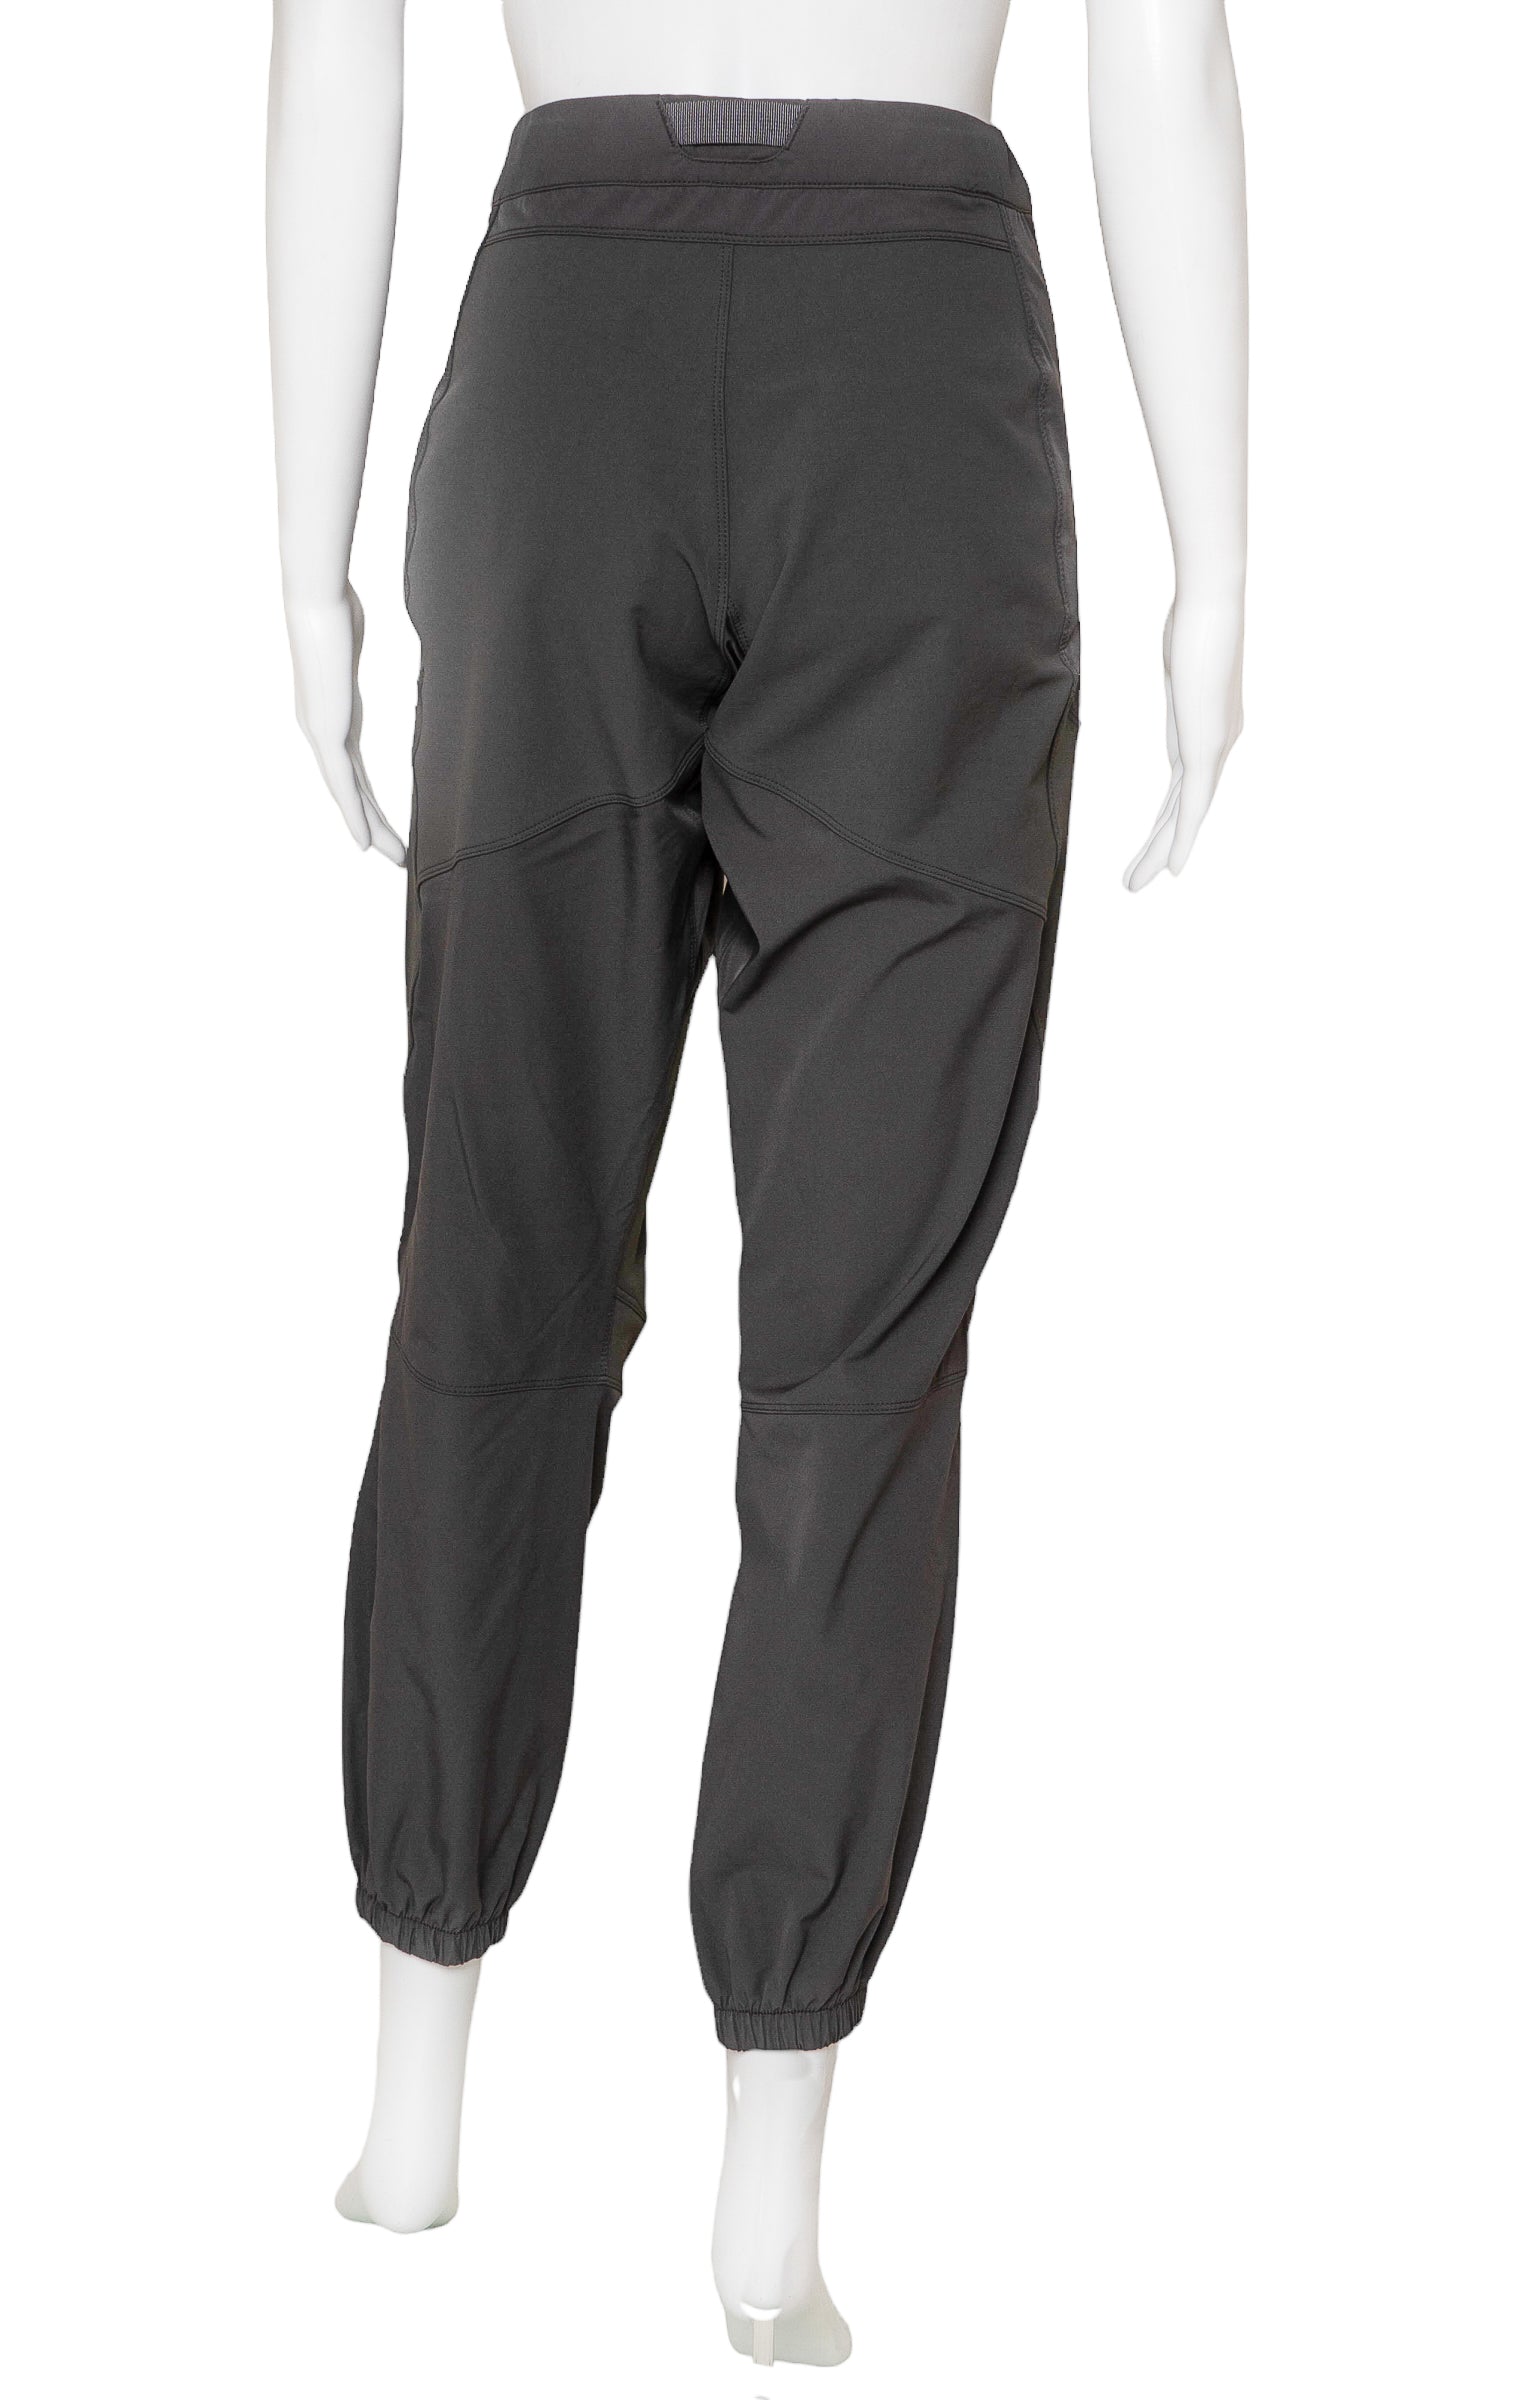 ARC'TERYX Ski Pants Size: Marked L but altered to US 28/6